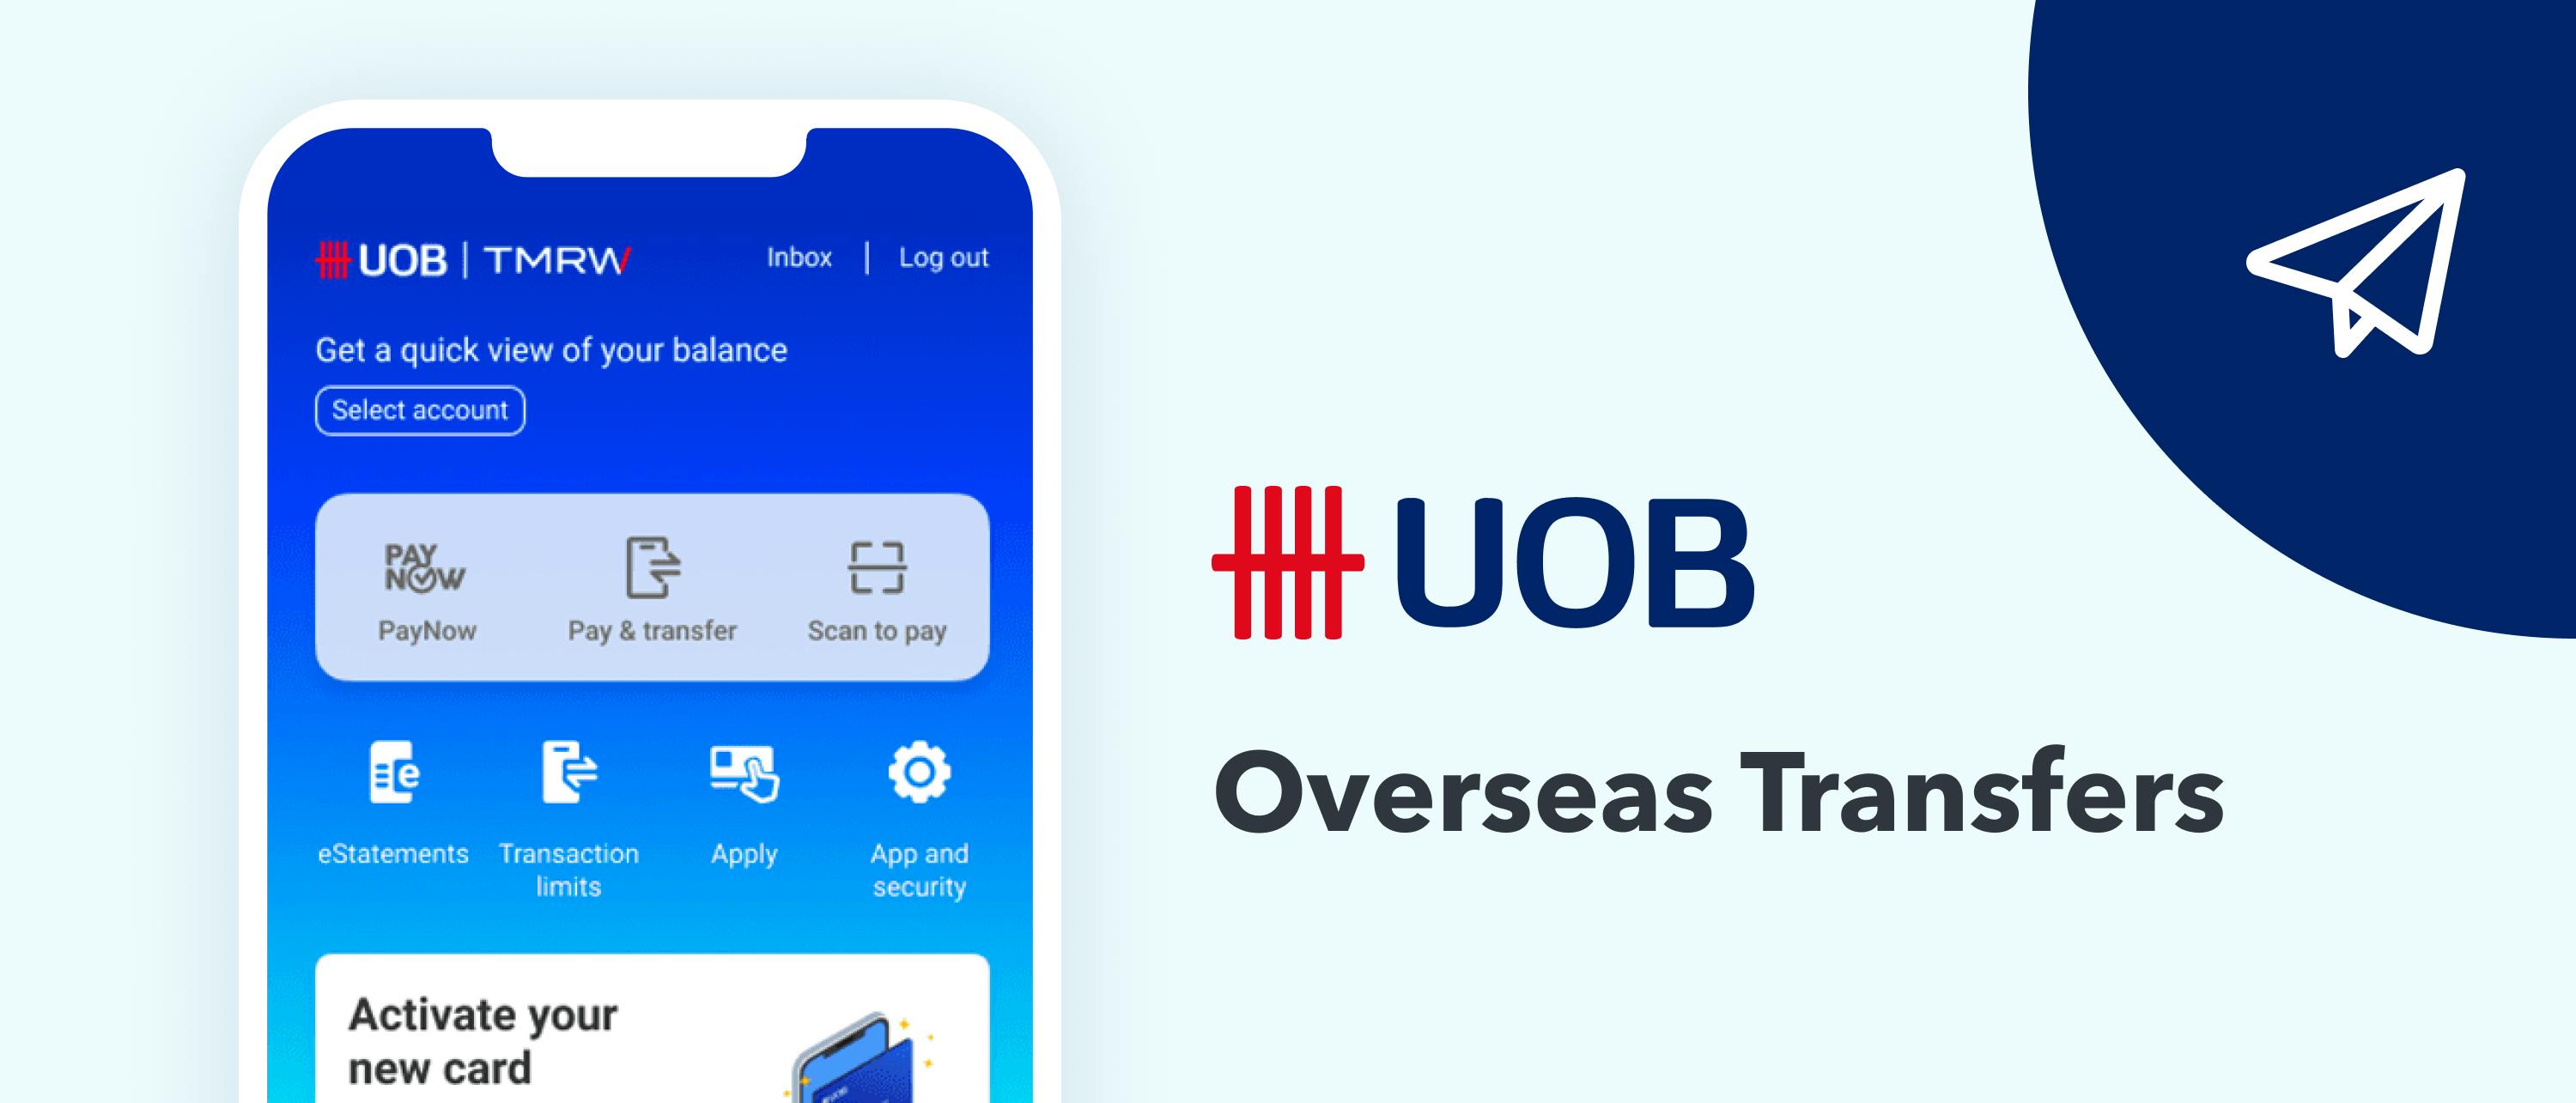 UOB Swift Code Singapore - List And How To Find ? - Singapore Banks Guide